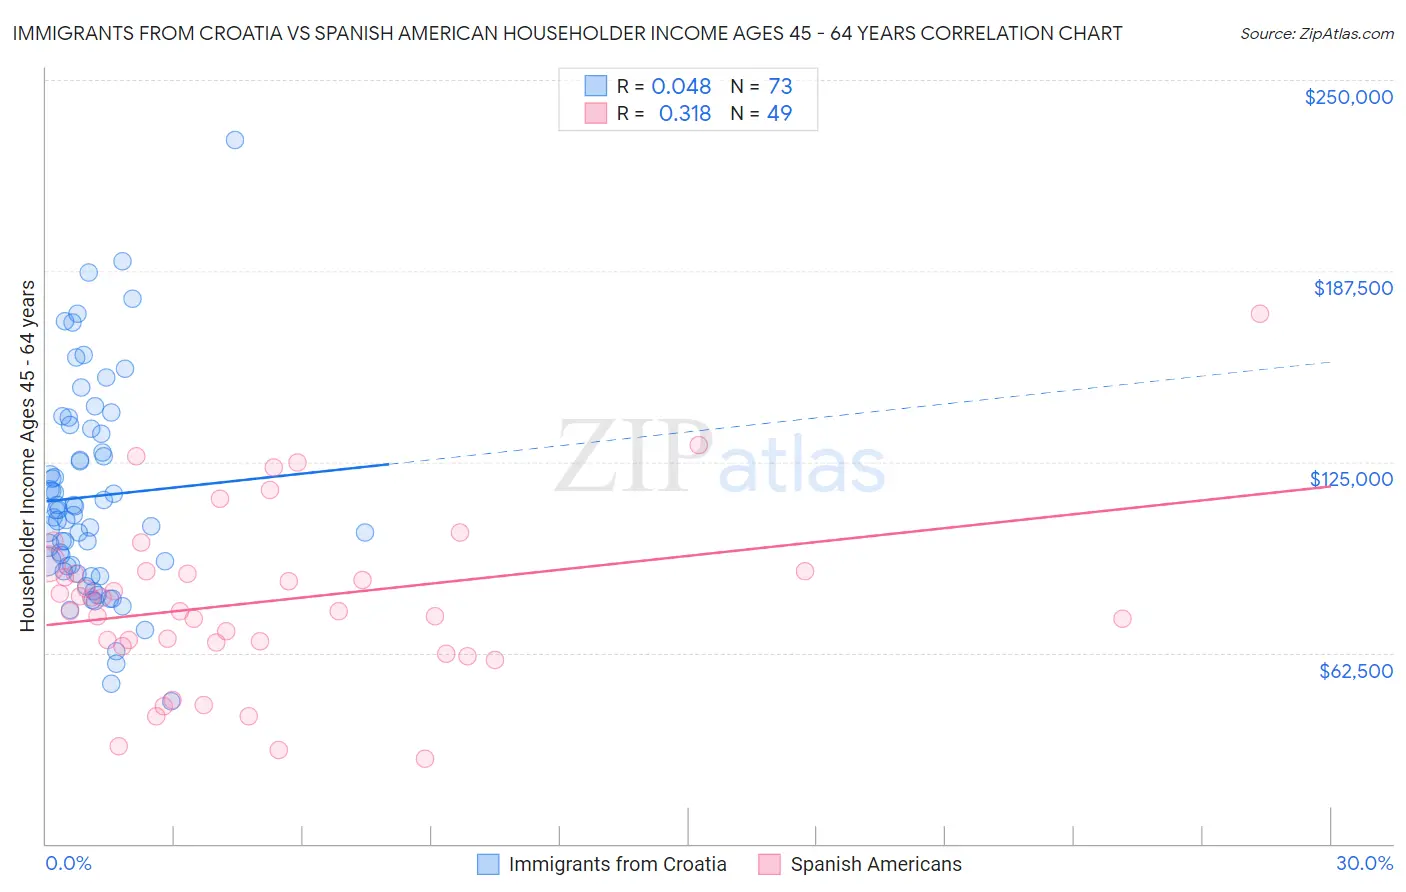 Immigrants from Croatia vs Spanish American Householder Income Ages 45 - 64 years